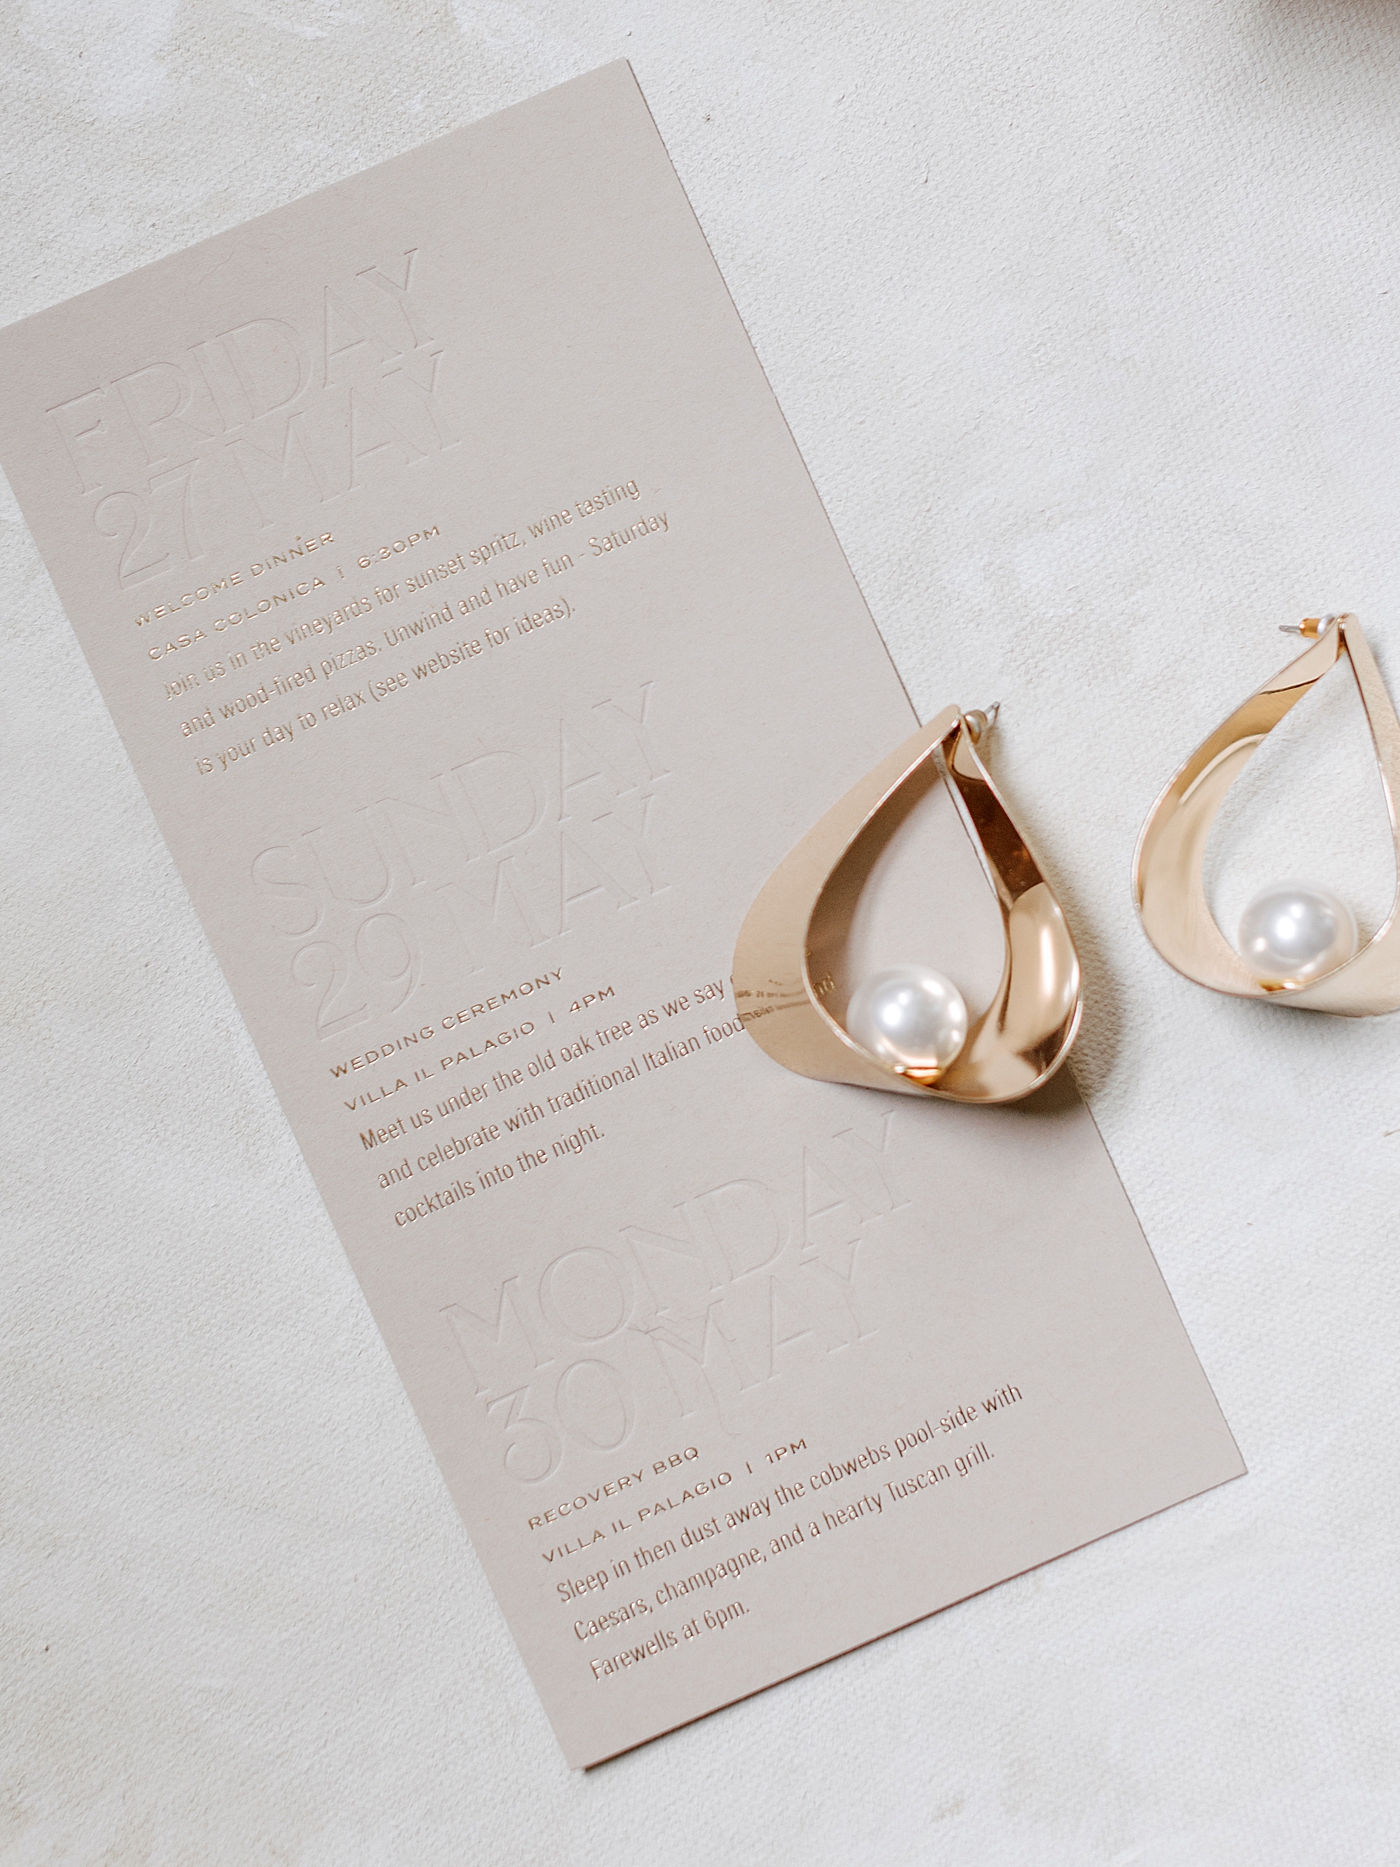 Gold and pearl earrings on a wedding invitation | Photo by NYC Wedding Photographer Hope Helmuth 